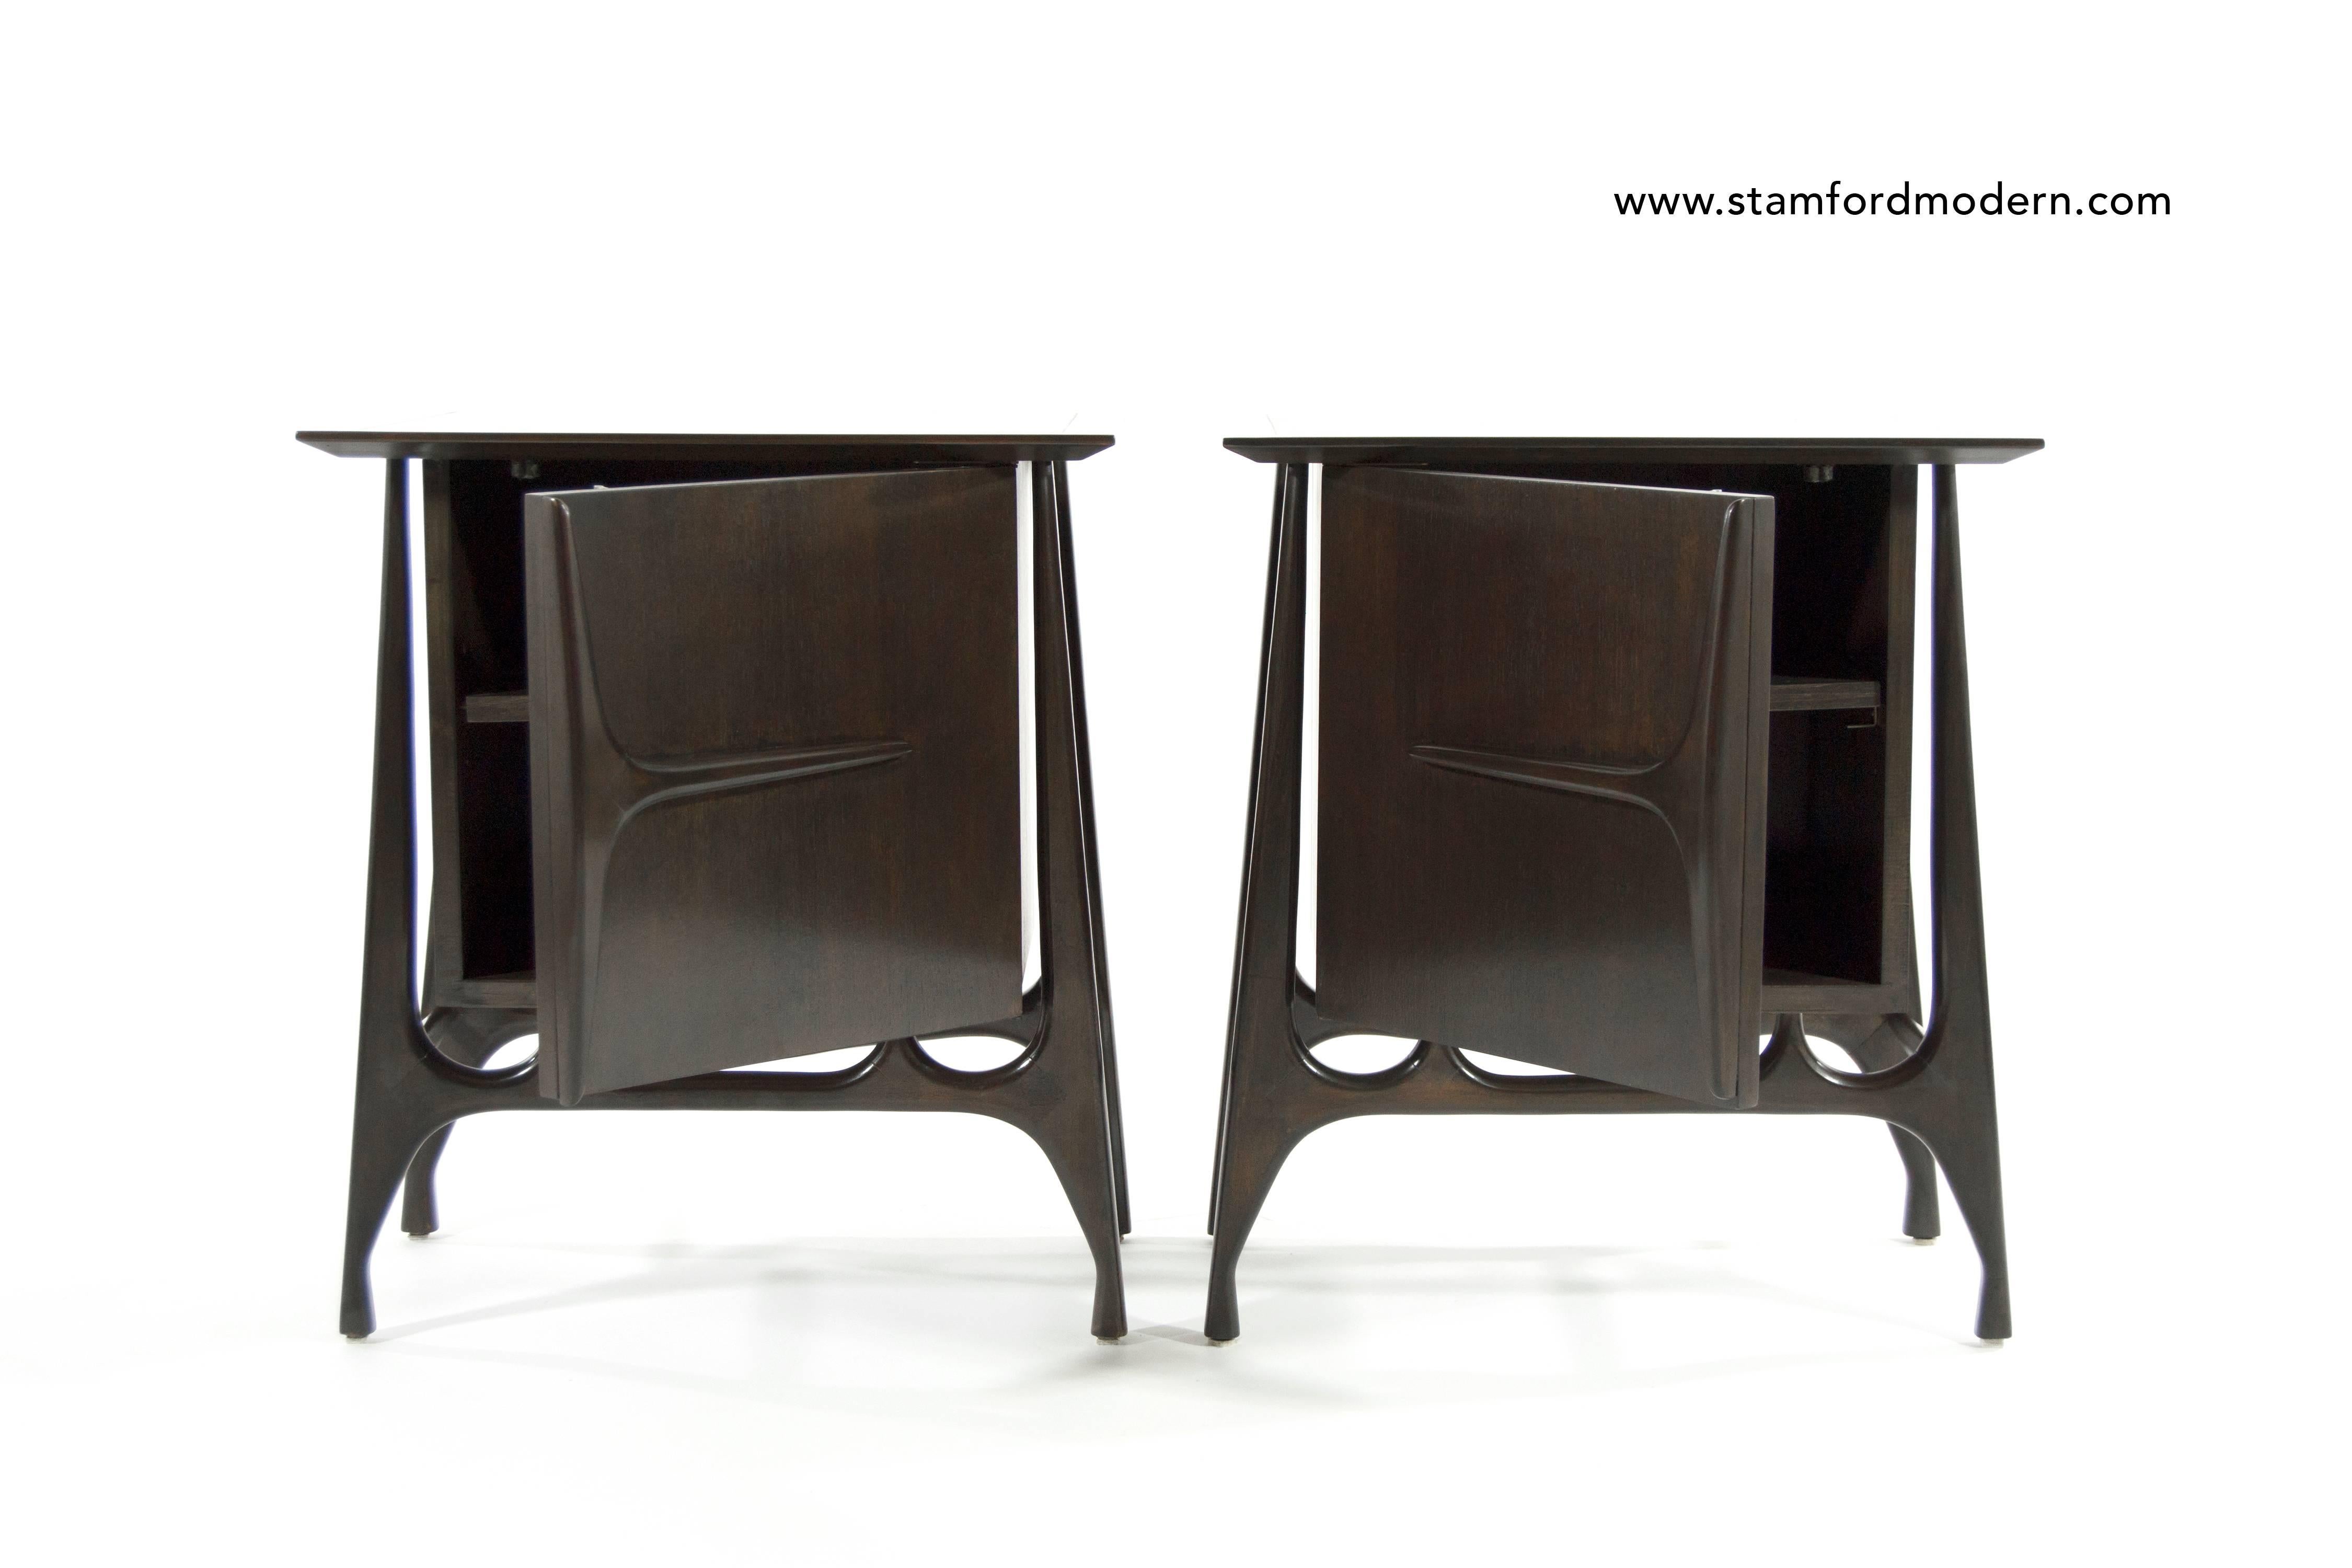 A great pair of end tables or nightstands featuring sculptural form. Newly refinished in dark walnut.